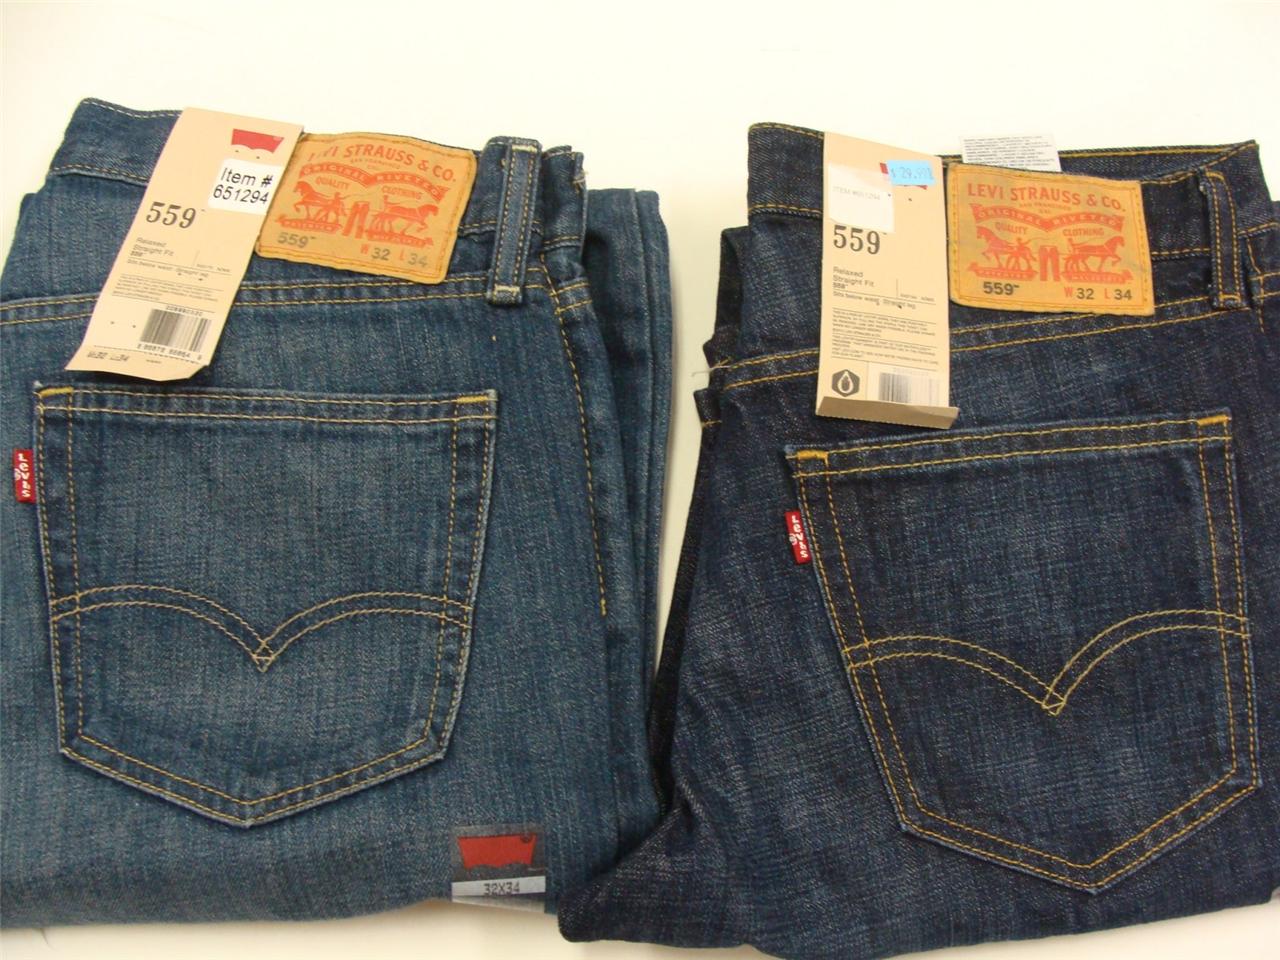 Levis Men's Relaxed Straight 559 Jeans Assorted Washes and Sizes New ...